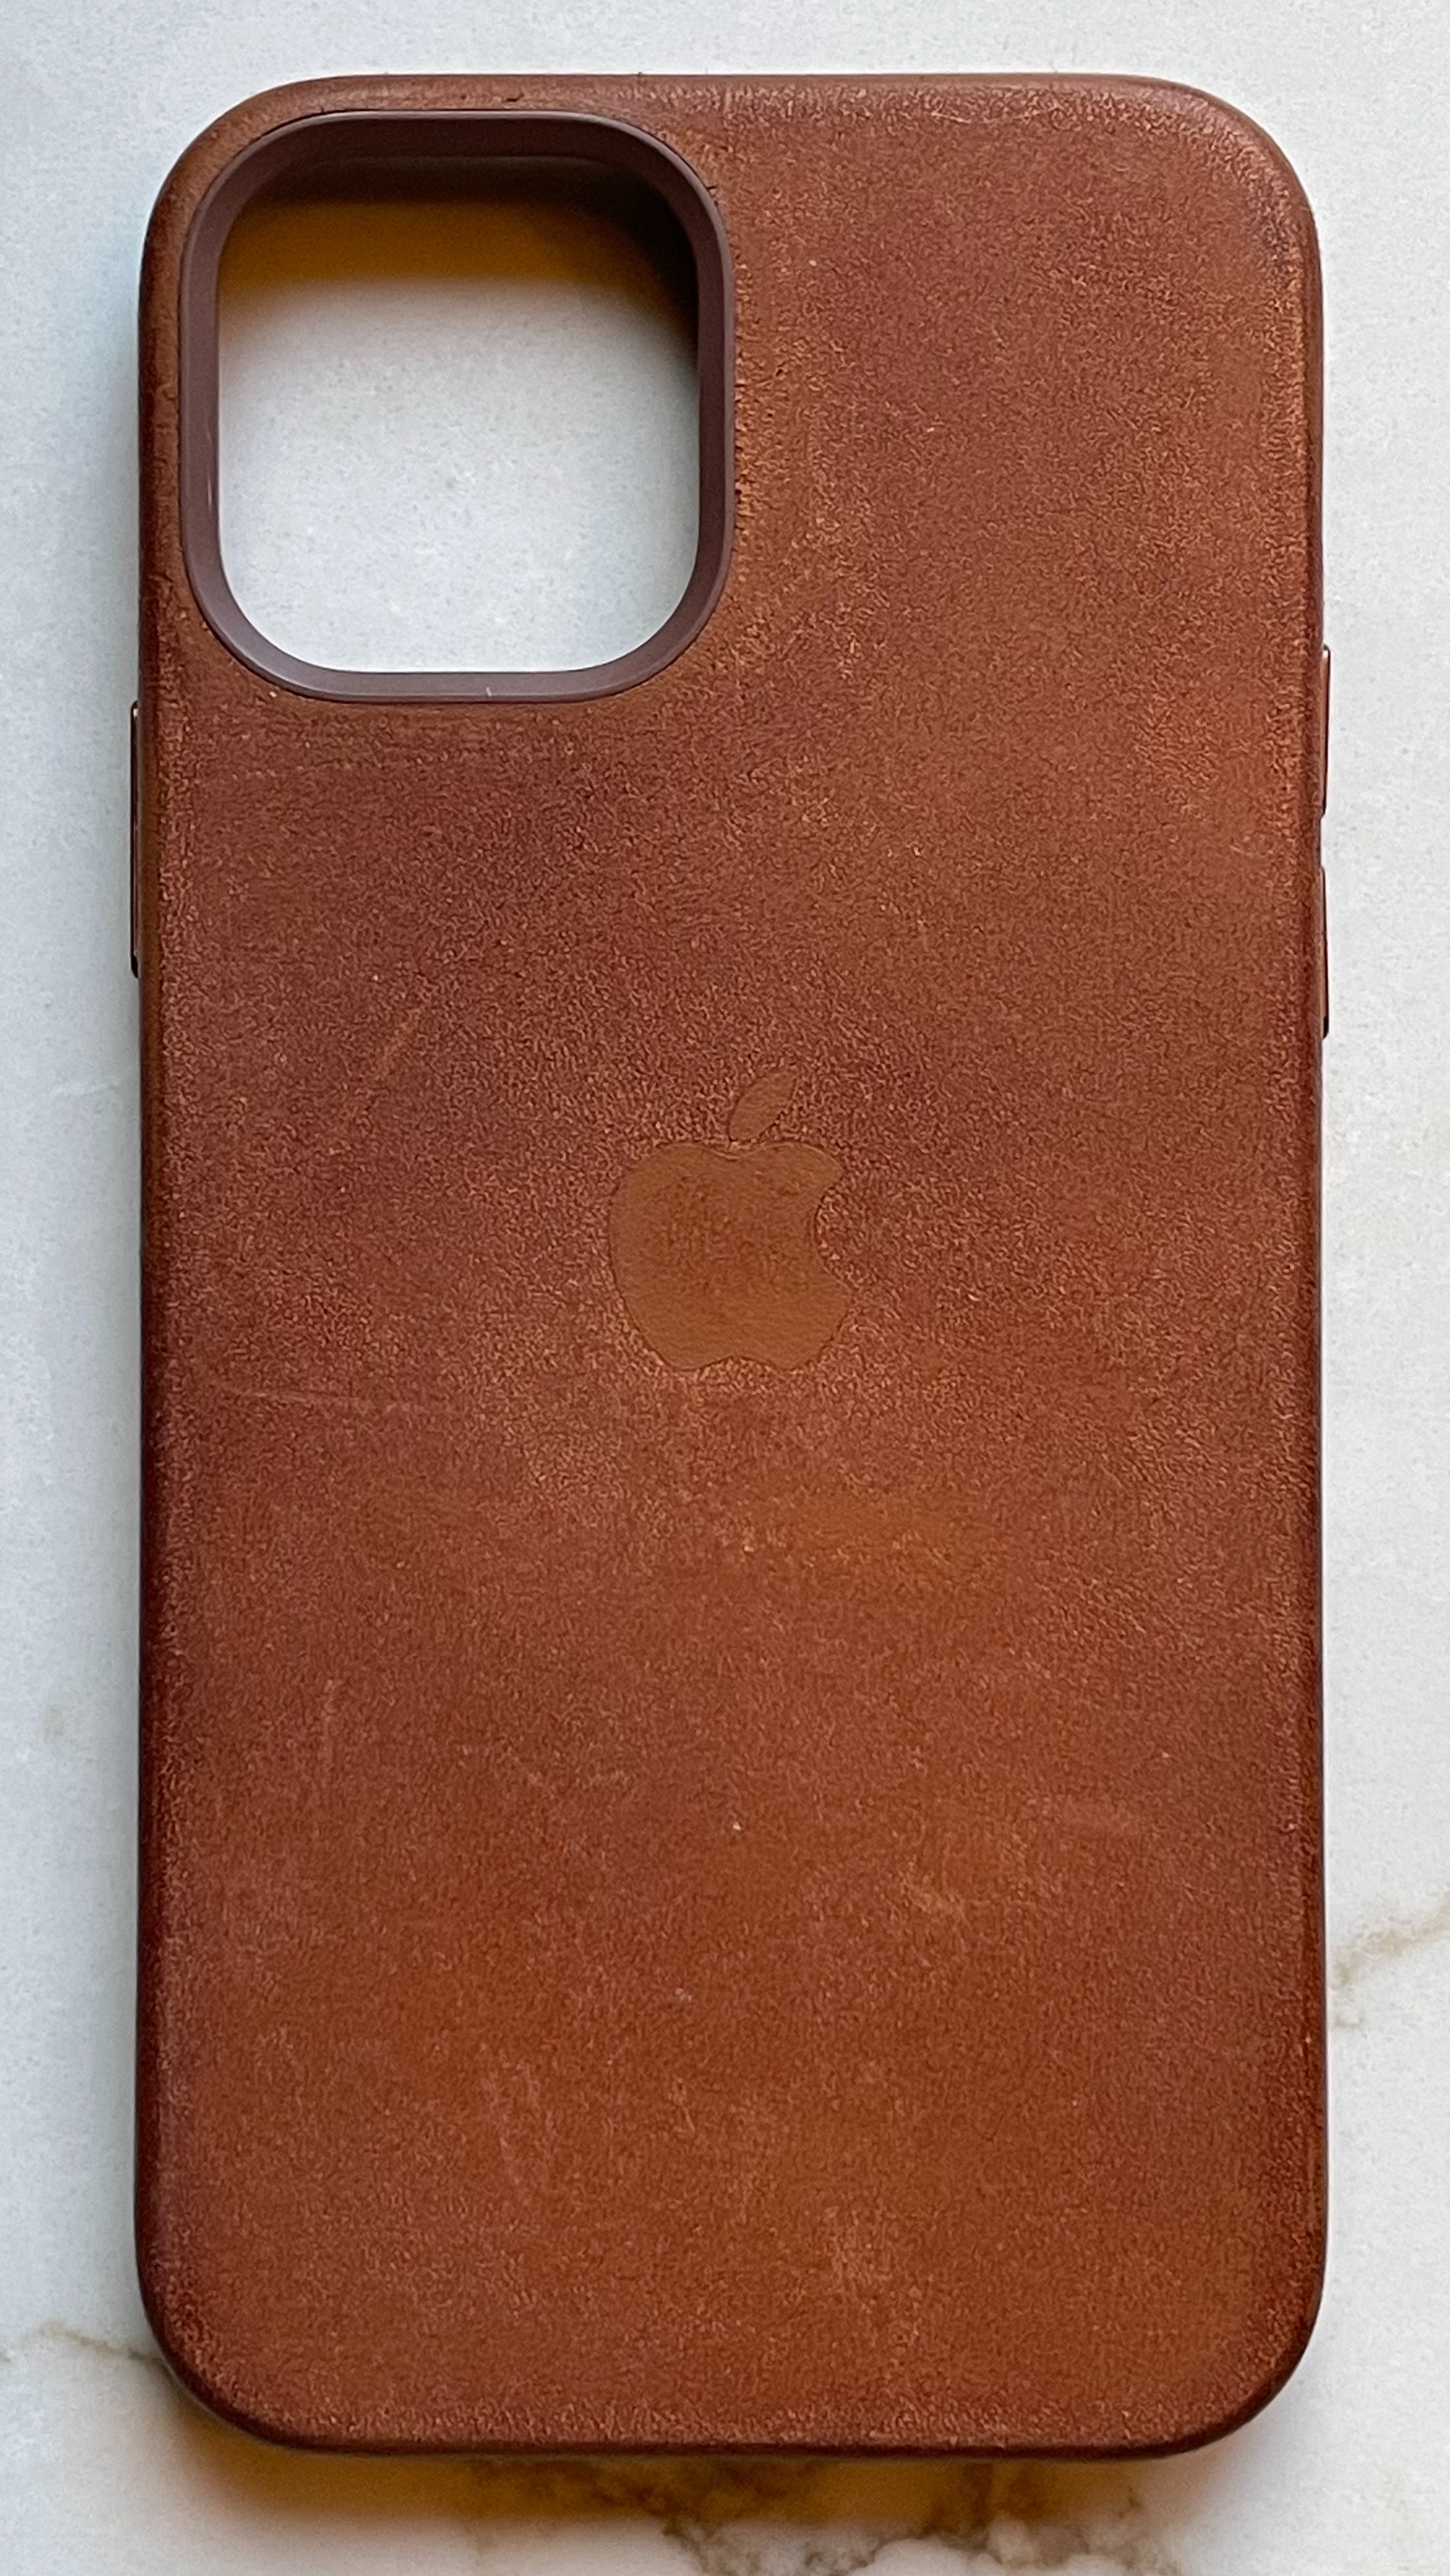 What's gone wrong with Apple's leather iPhone case?